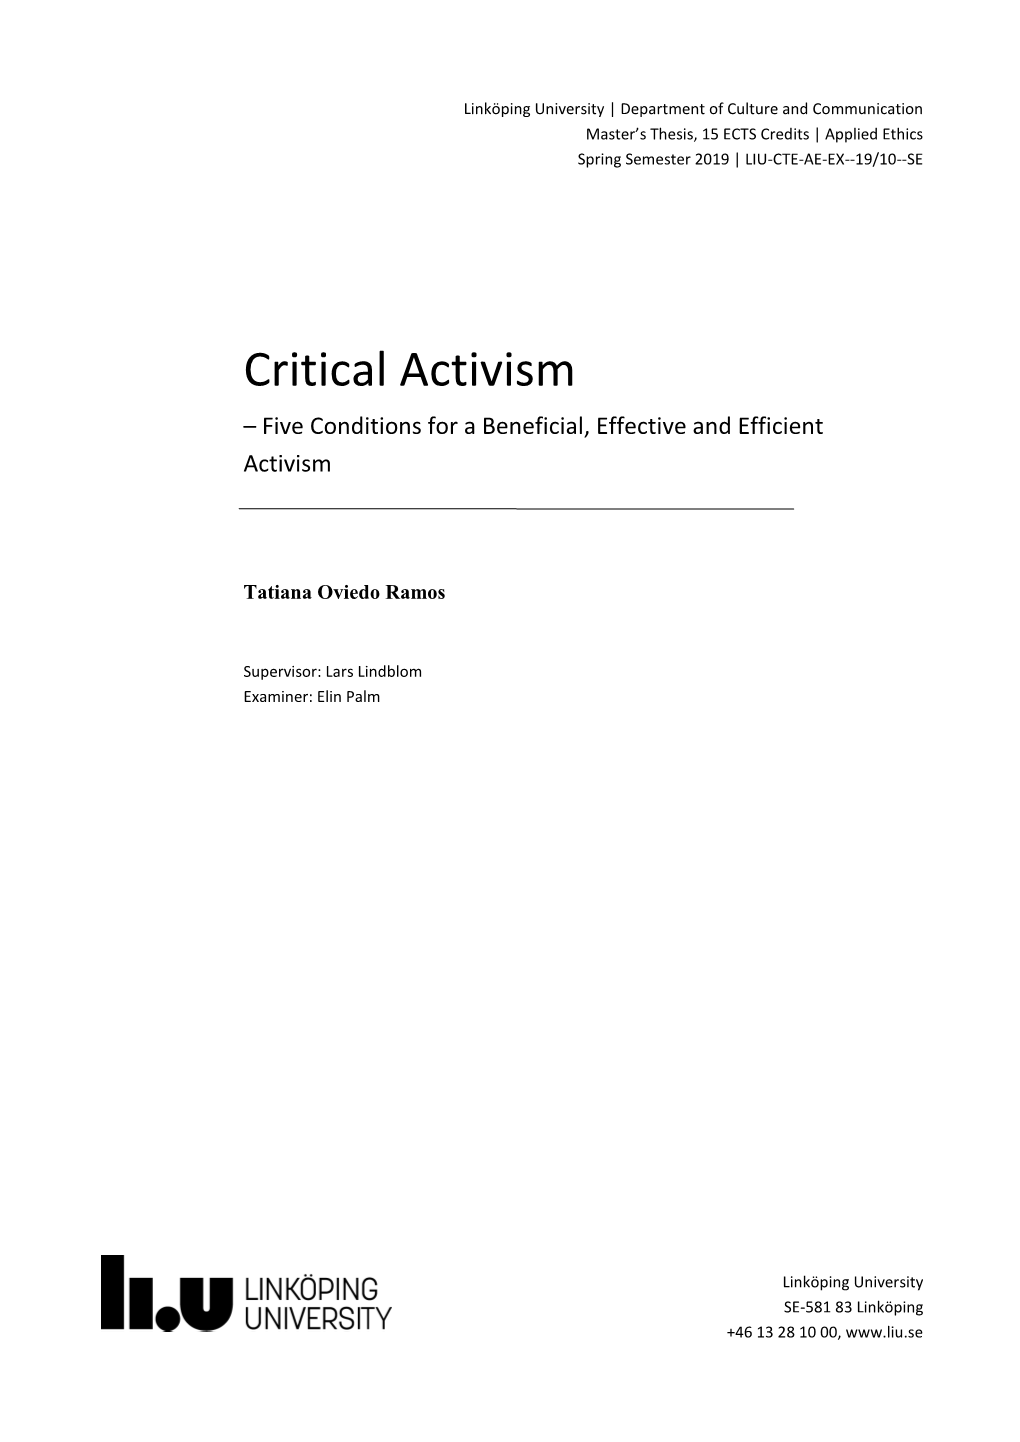 Critical Activism – Five Conditions for a Beneficial, Effective and Efficient Activism